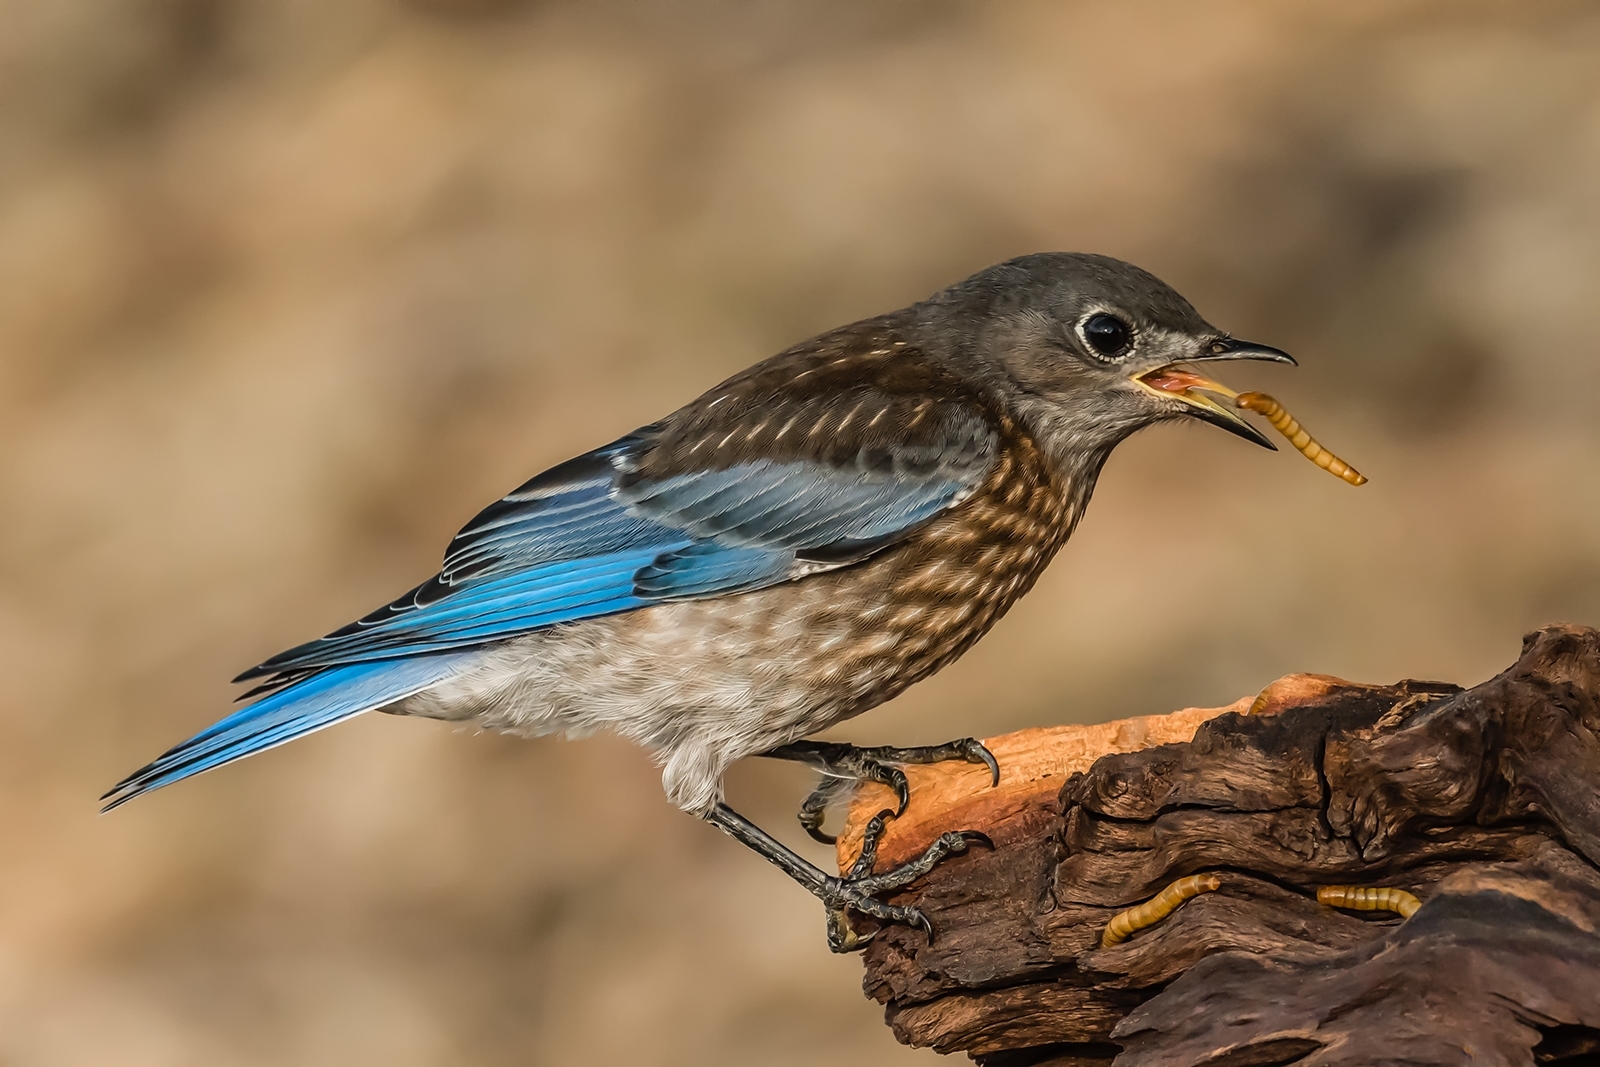 'Western Bluebird eating a mealworm' (PA 1 Place) by Susie Kelly - MR